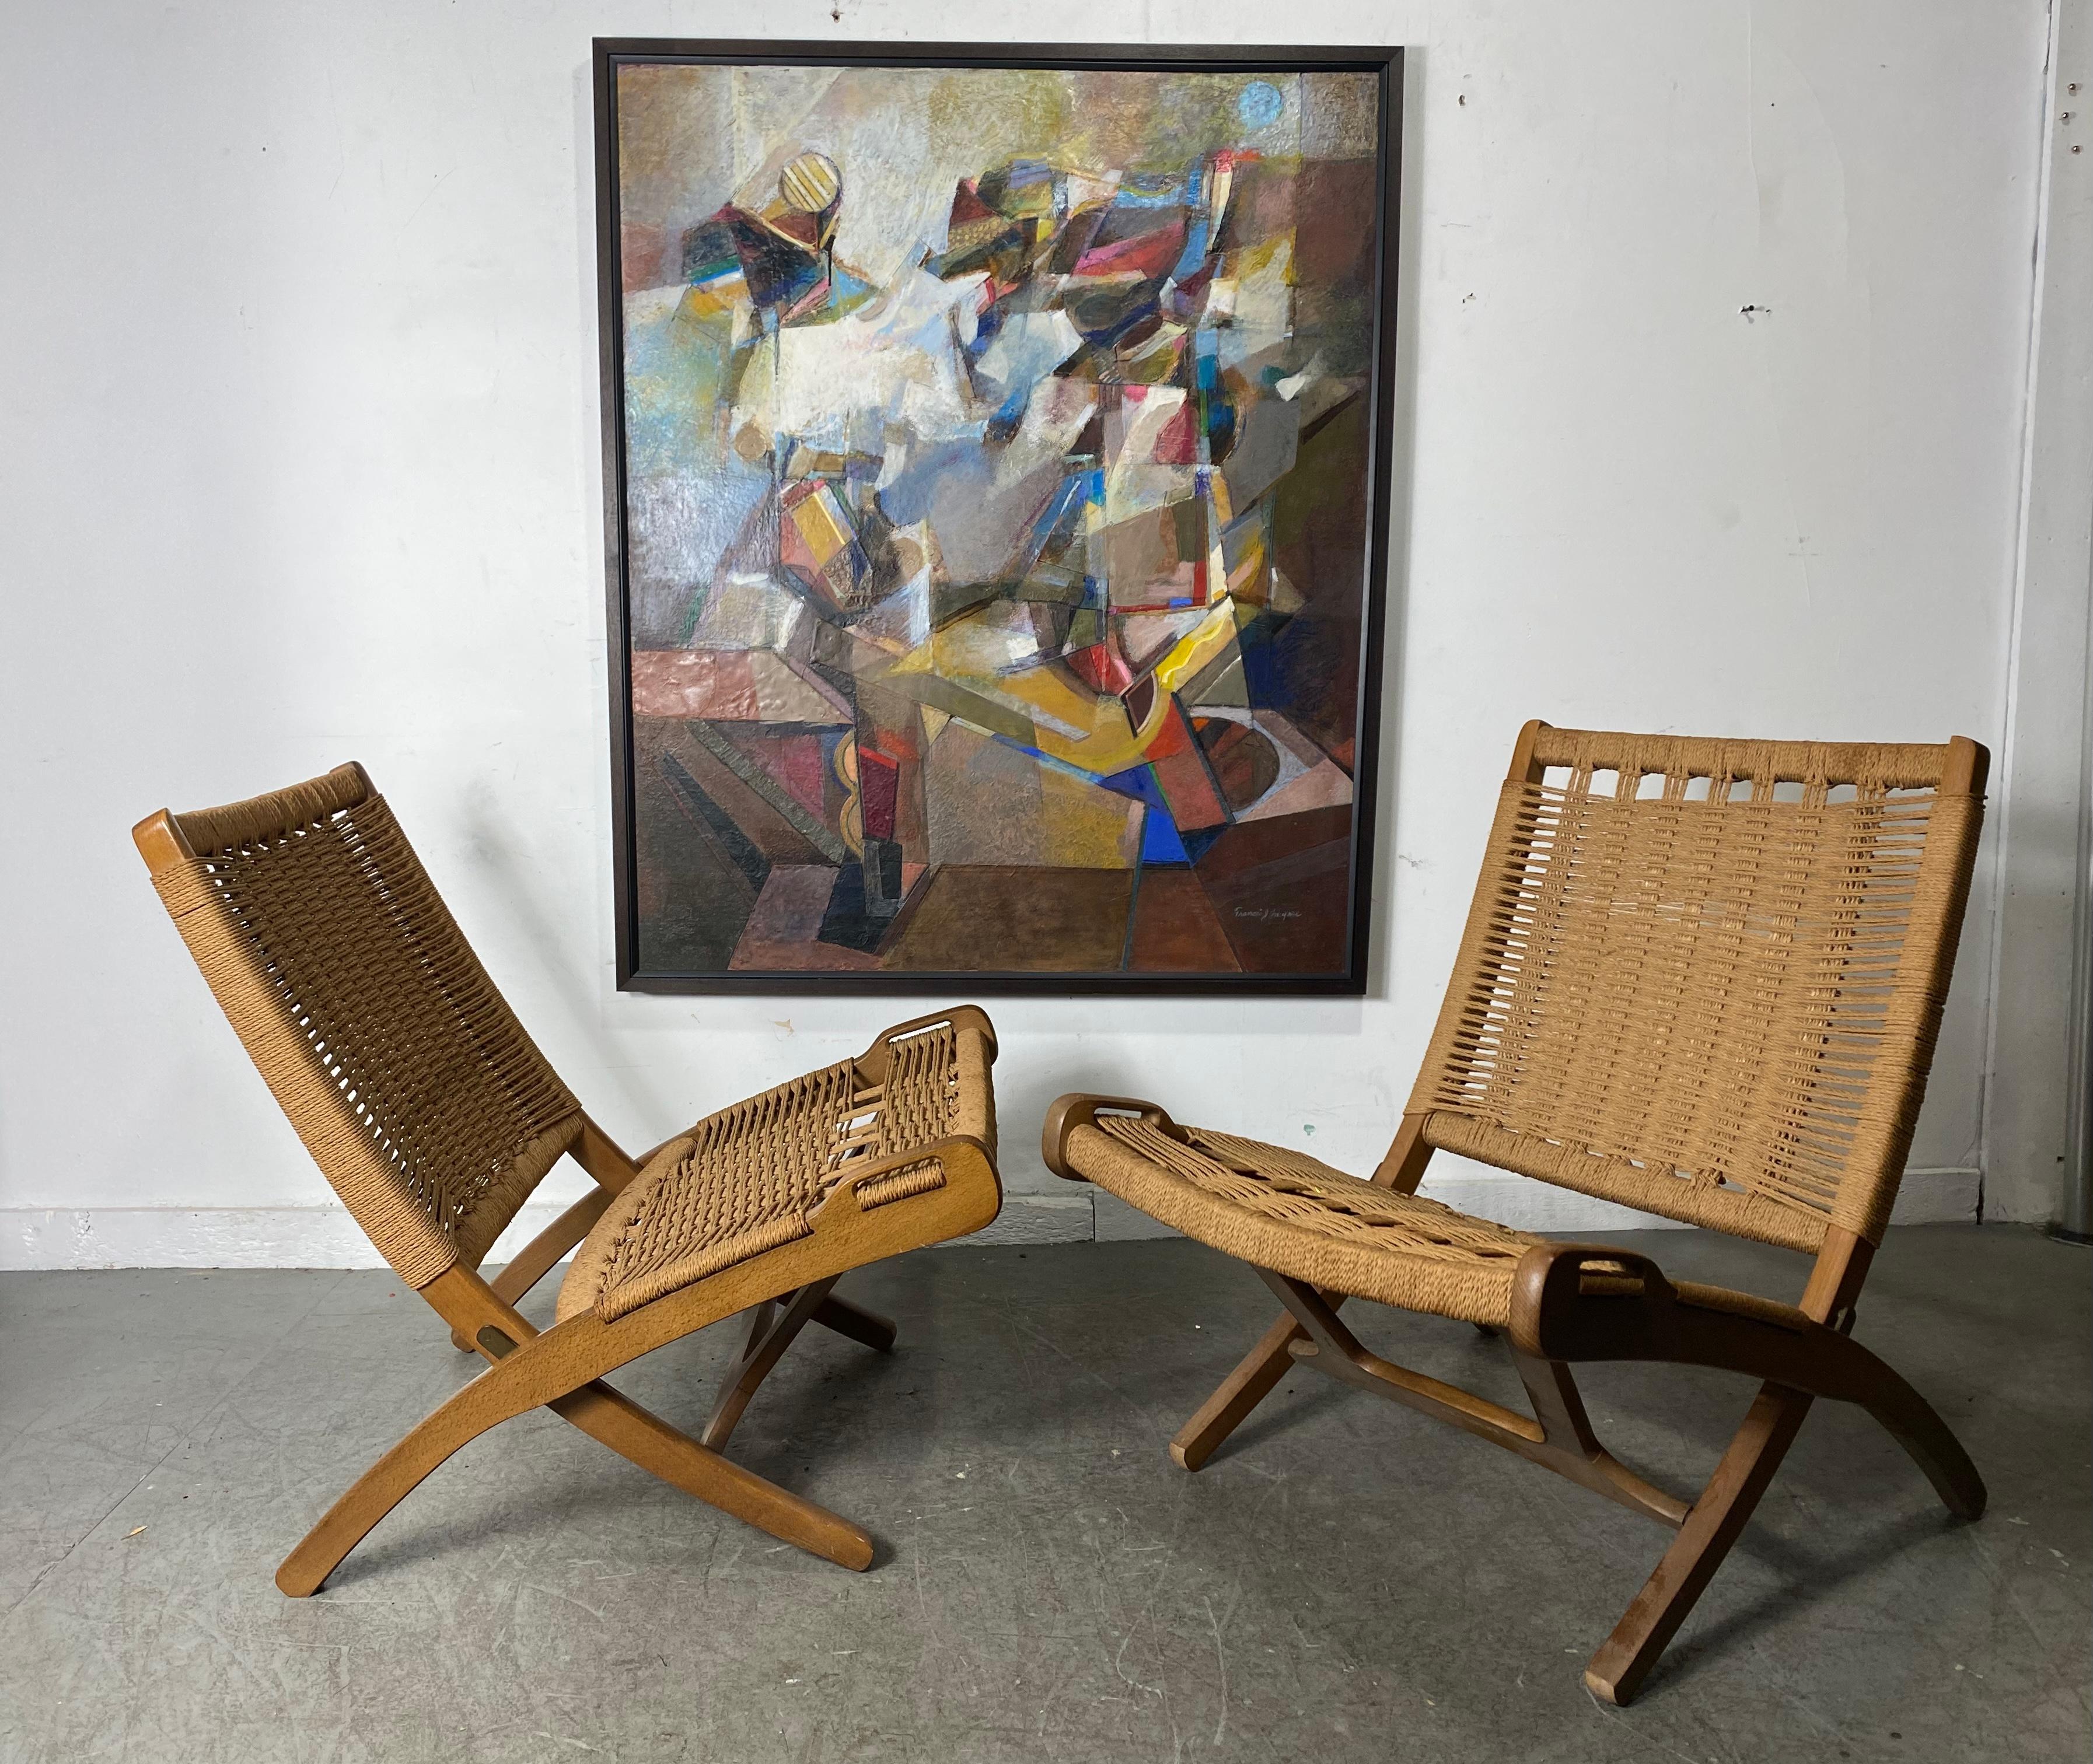 Design closely based on Hans Wegner's famous chair design.Extremely comfortable. This stunning pair of Mid-Century Modern rope chairs looks just like Wegner's iconic chairs, and they were made in Yugoslavia during the 1950s. The chairs boast